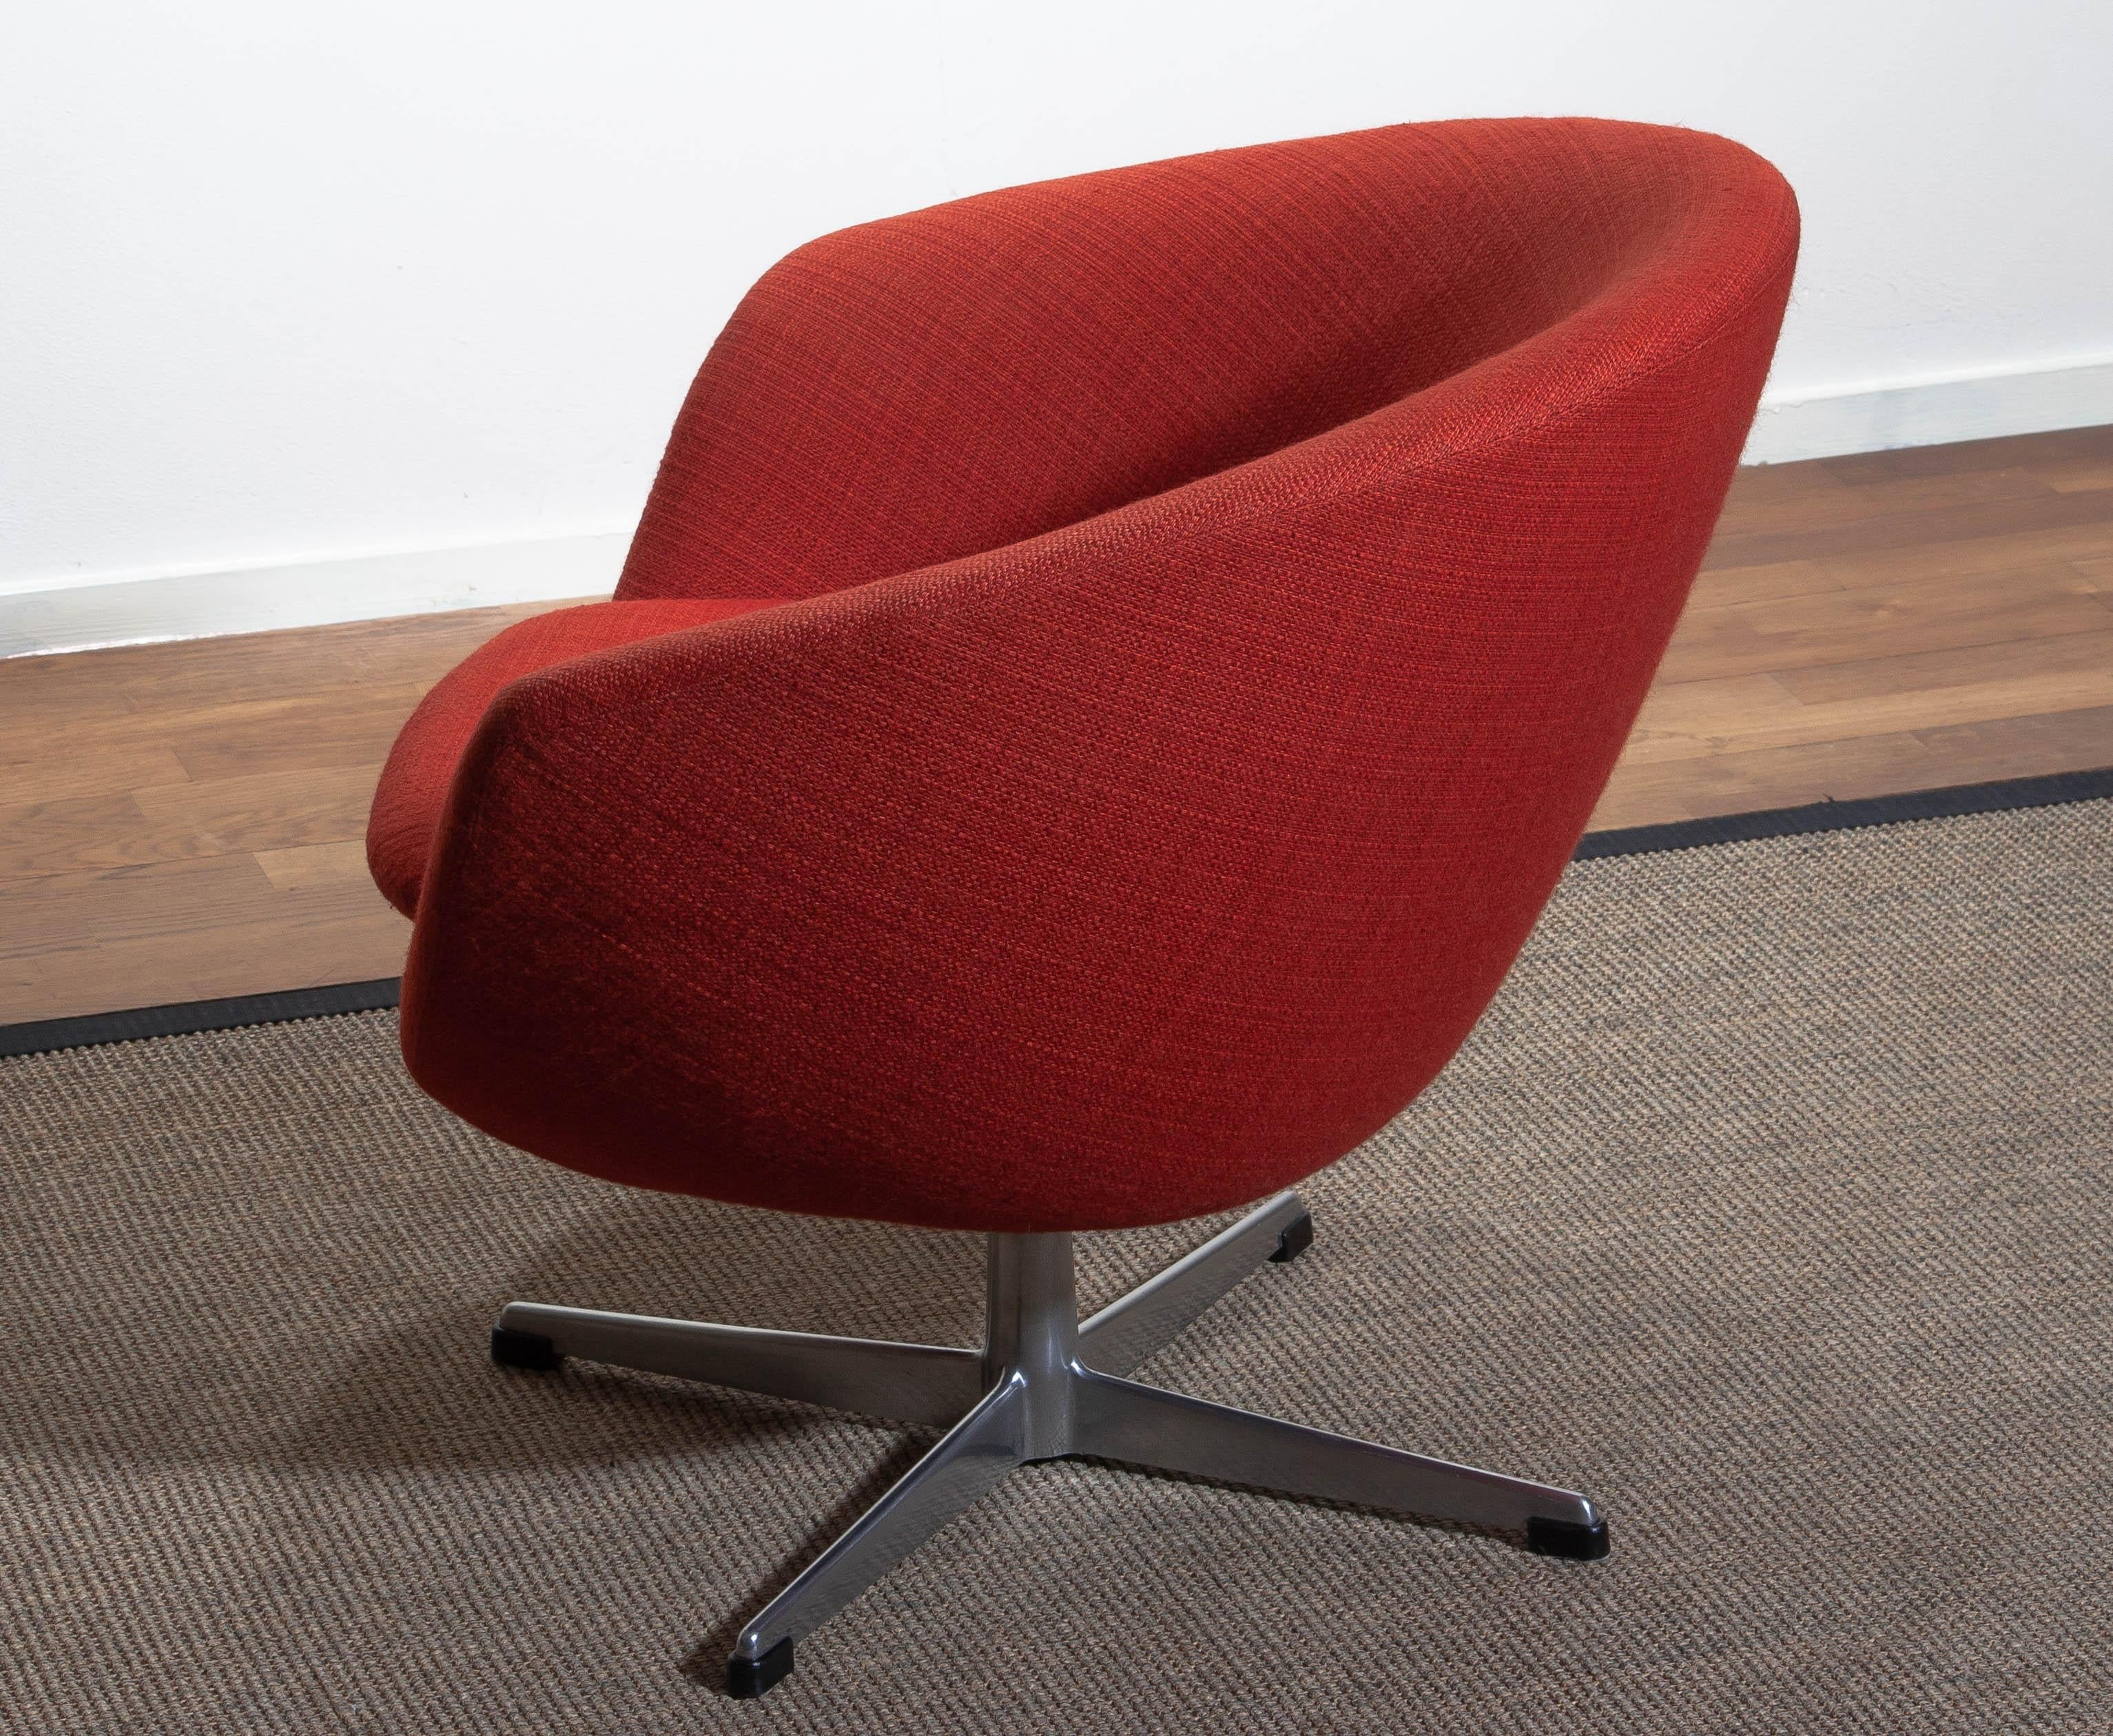 1960s, Swivel Lounge Chair by Carl Eric Klote for Overman, Denmark 1